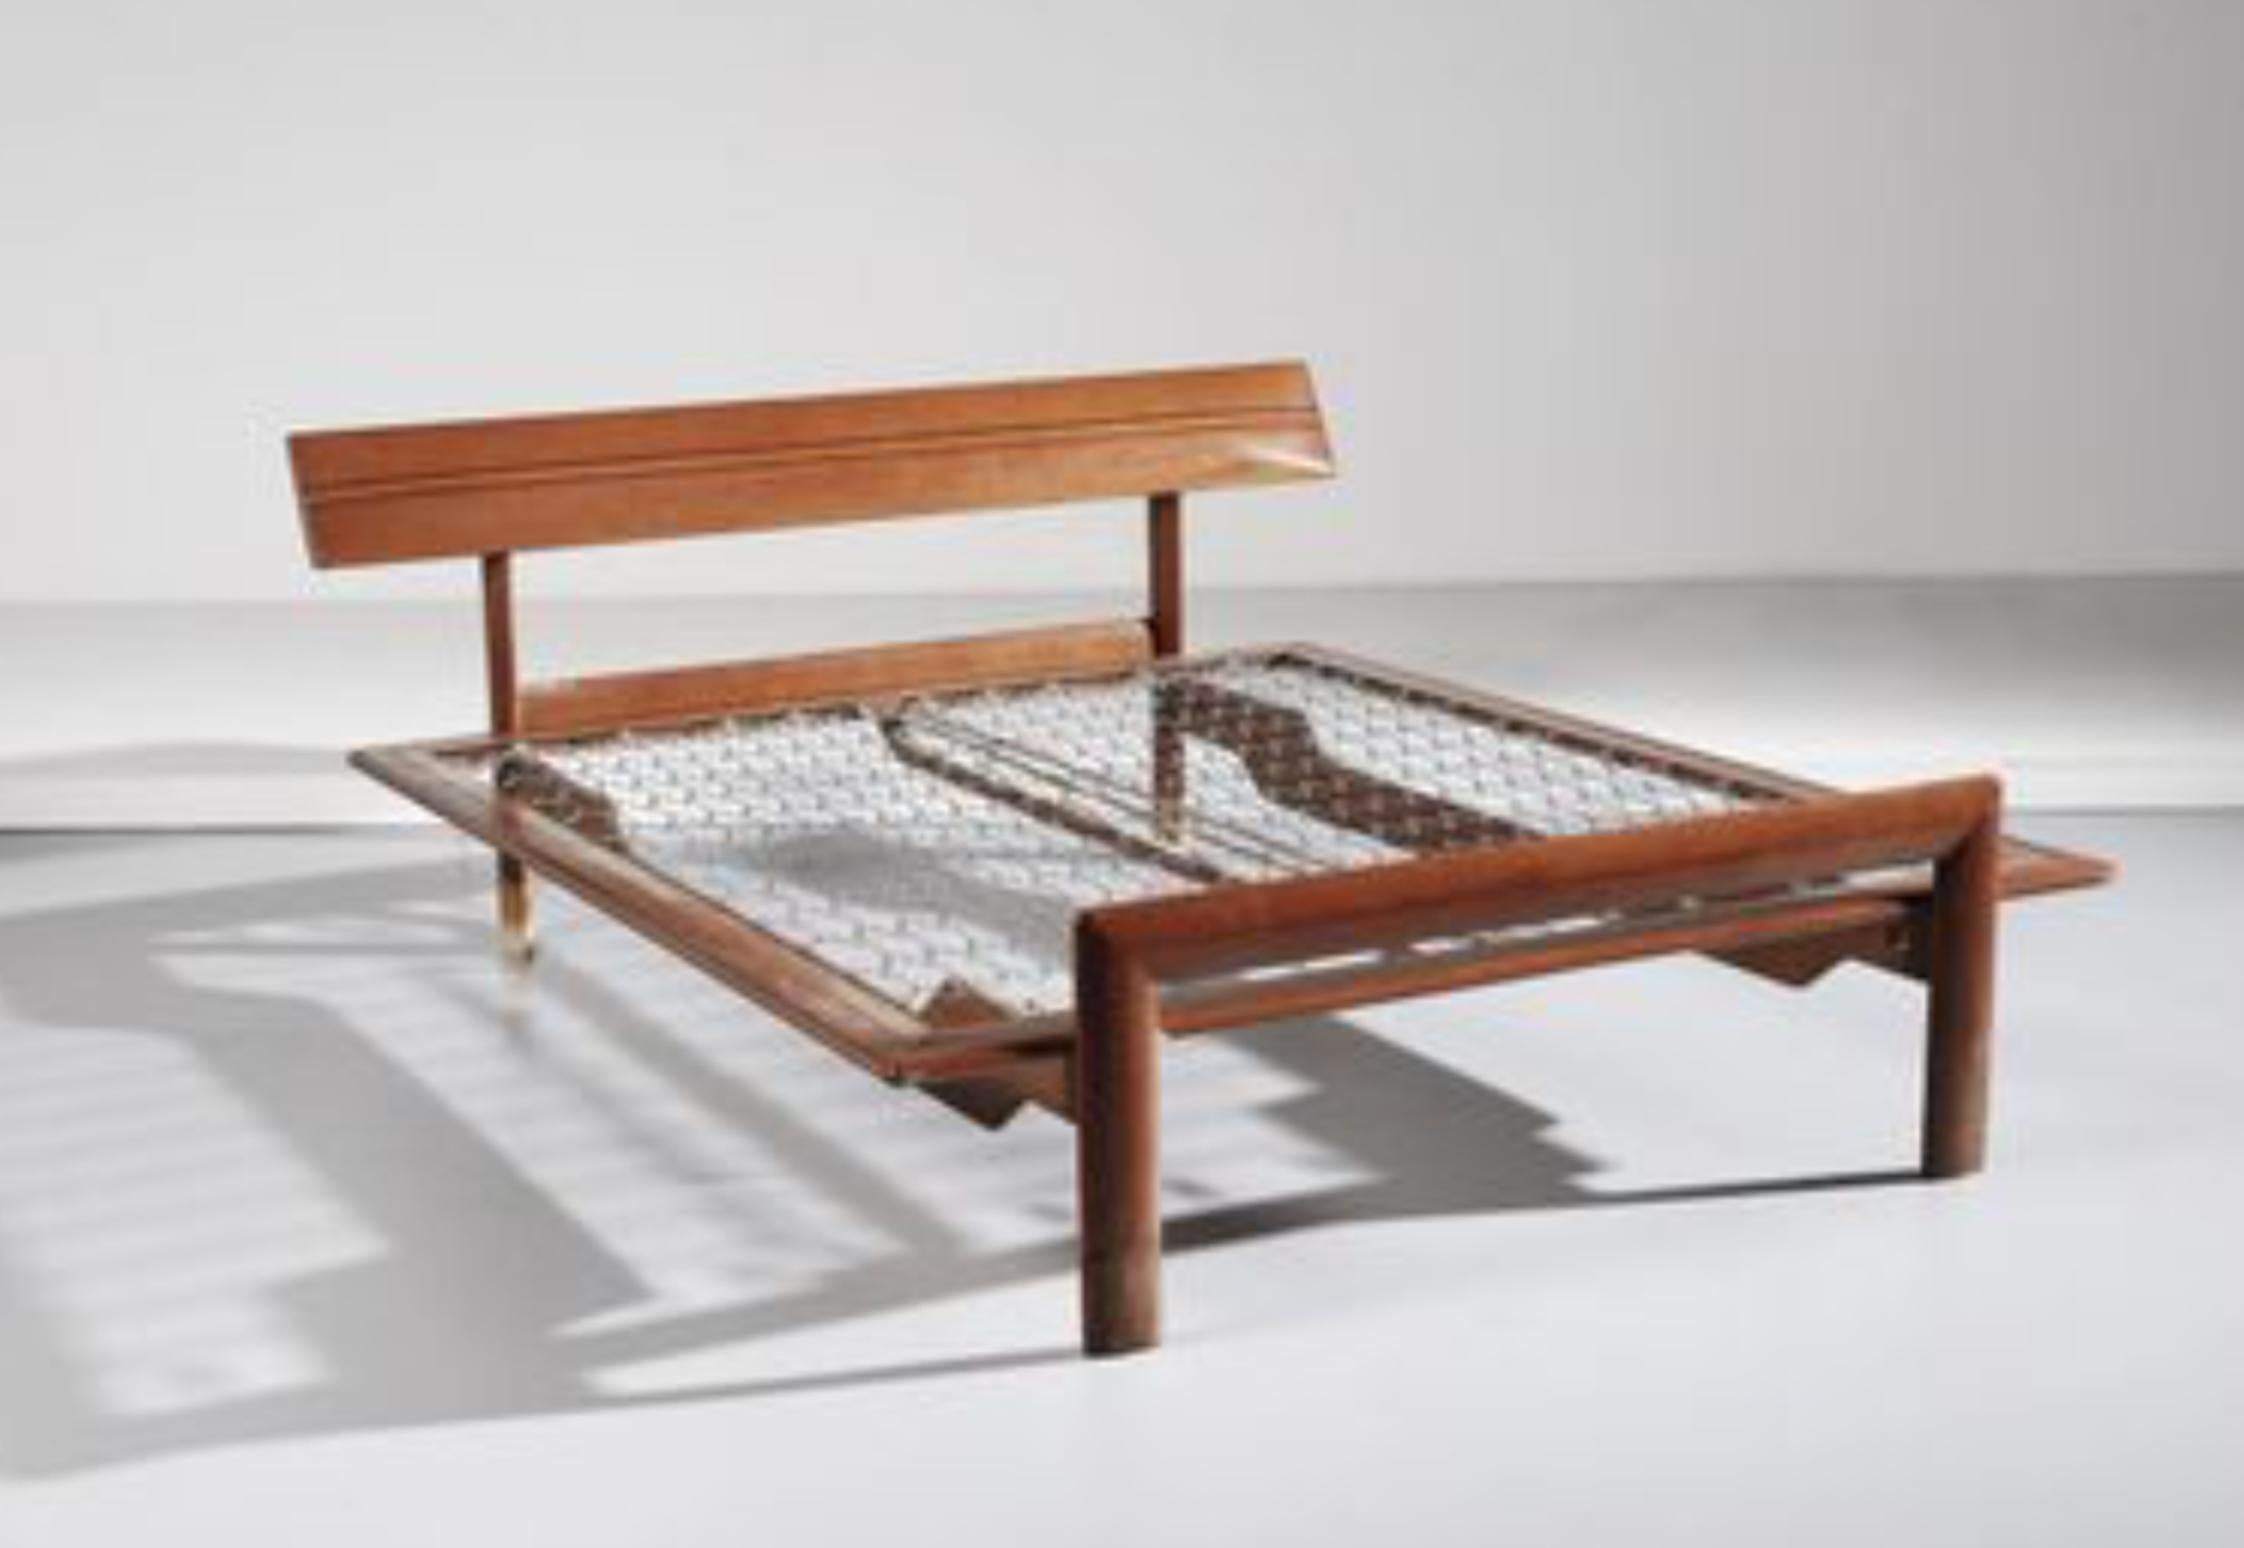 Italian wooden hand carved bed frame with metal frame made in 1967 by Eugenio Gerli for Tecno. Very good authentic condition with no restorations made.